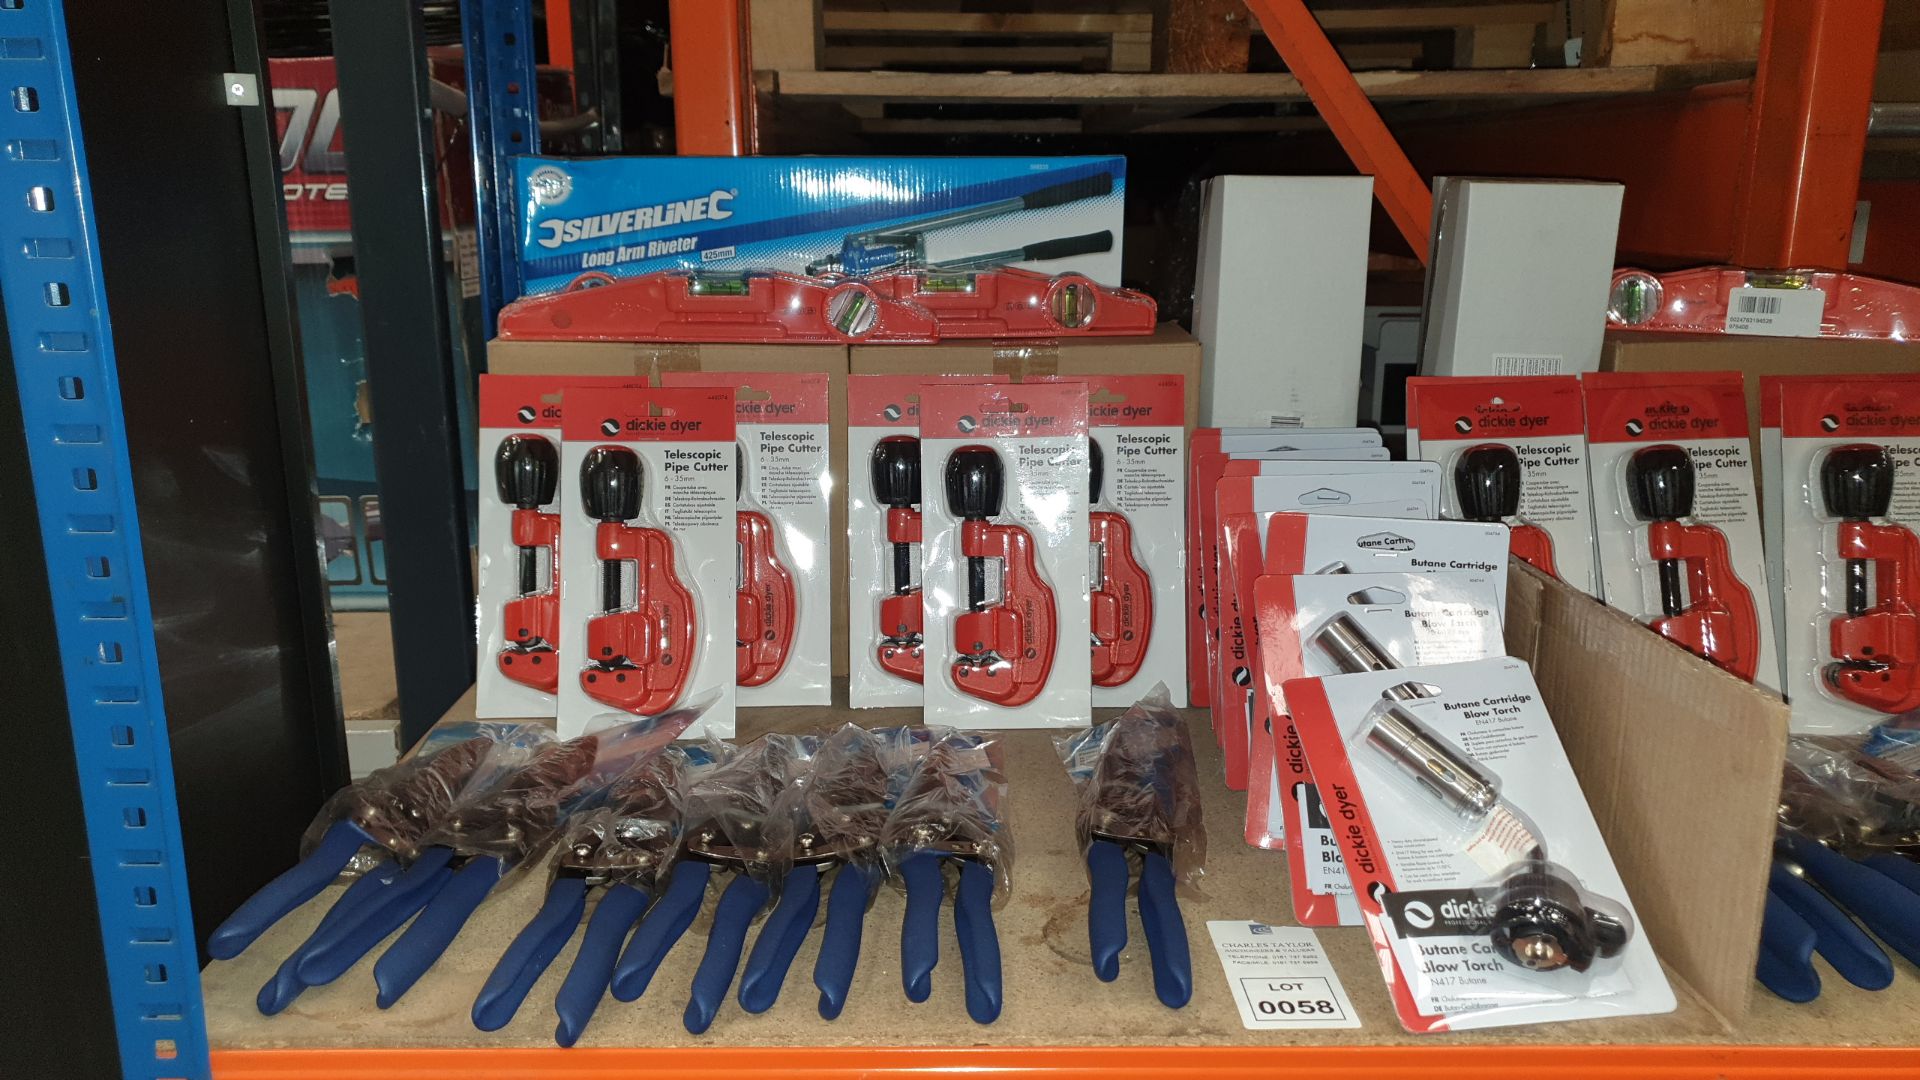 MIXED SILVERLINE TOOL LOT CONTAINING TELESCOPIC PIPE CUTTERS, POWER SNIPS, BUTANE CARTRIDGE BLOW